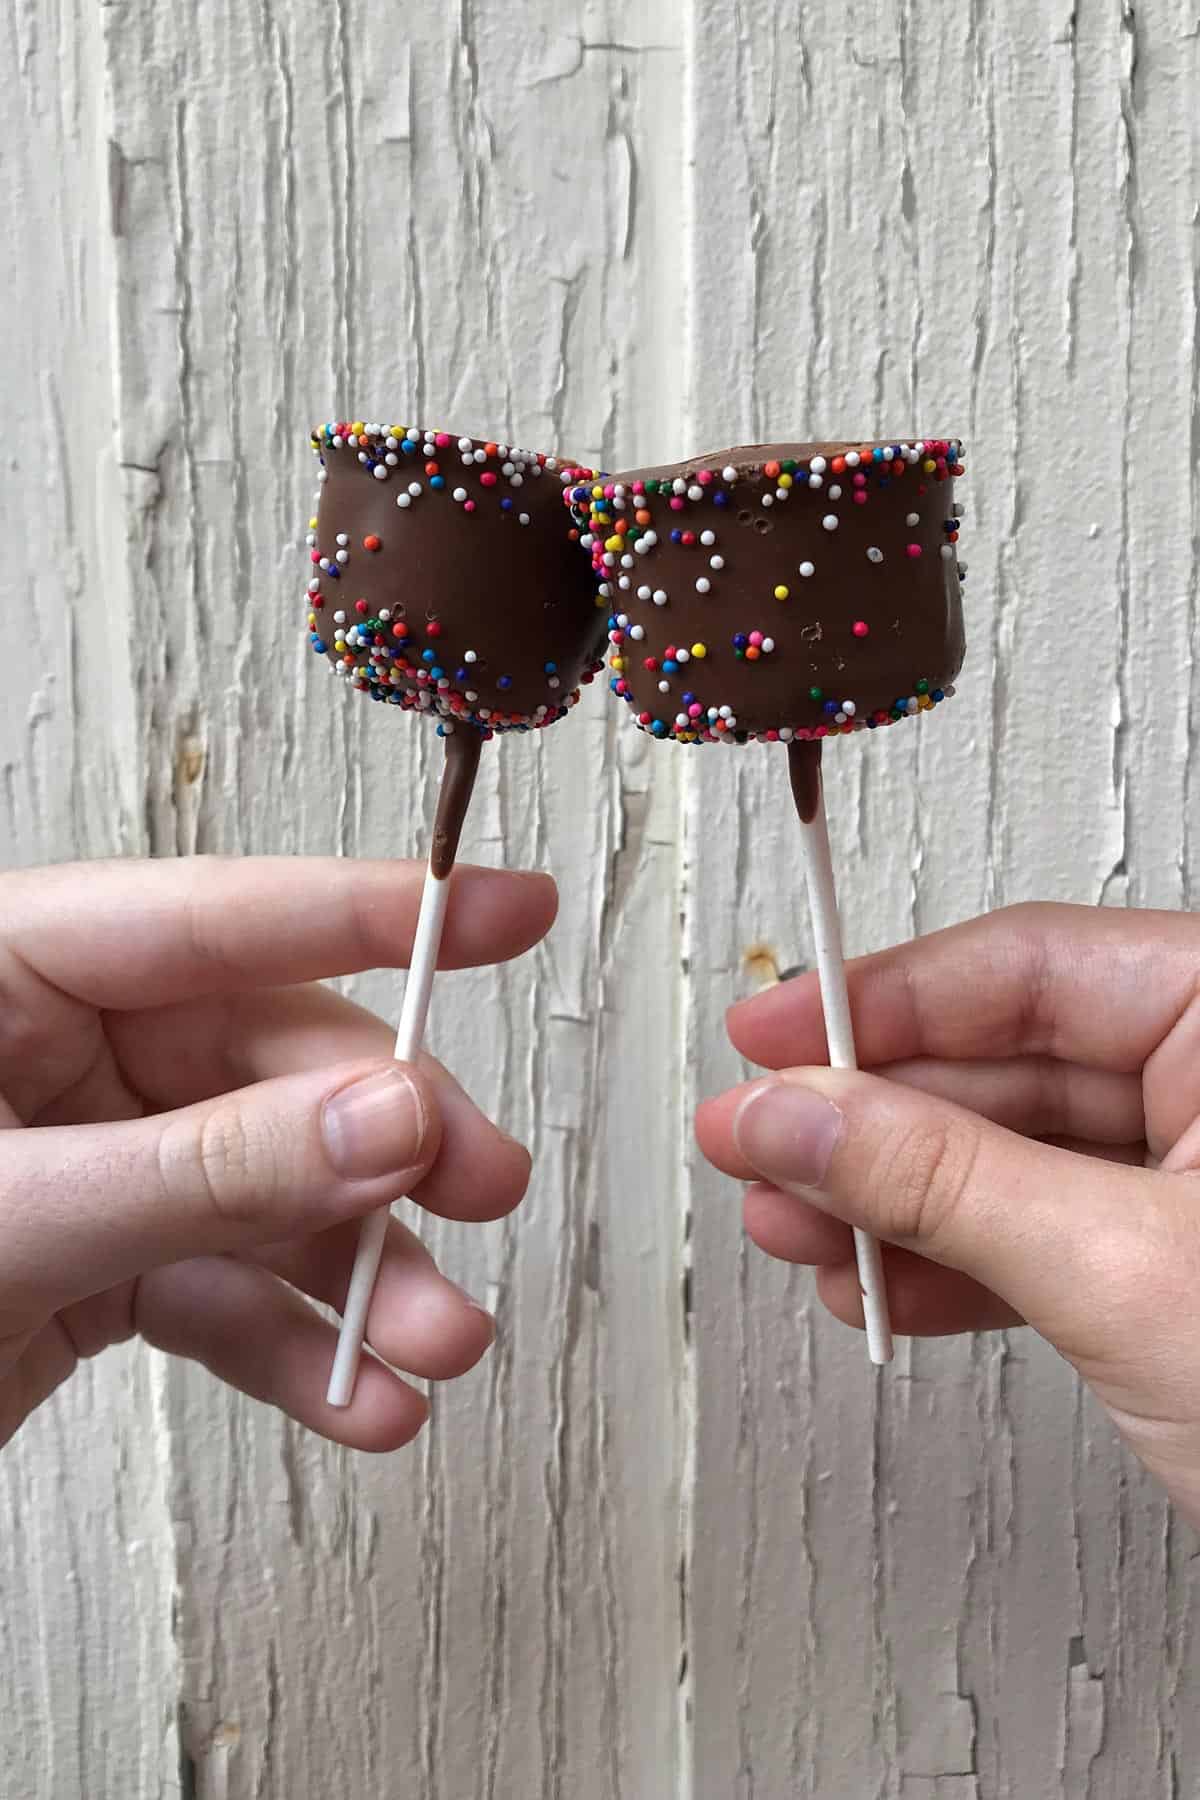 two hands holding chocolate covered marshmallows on sticks